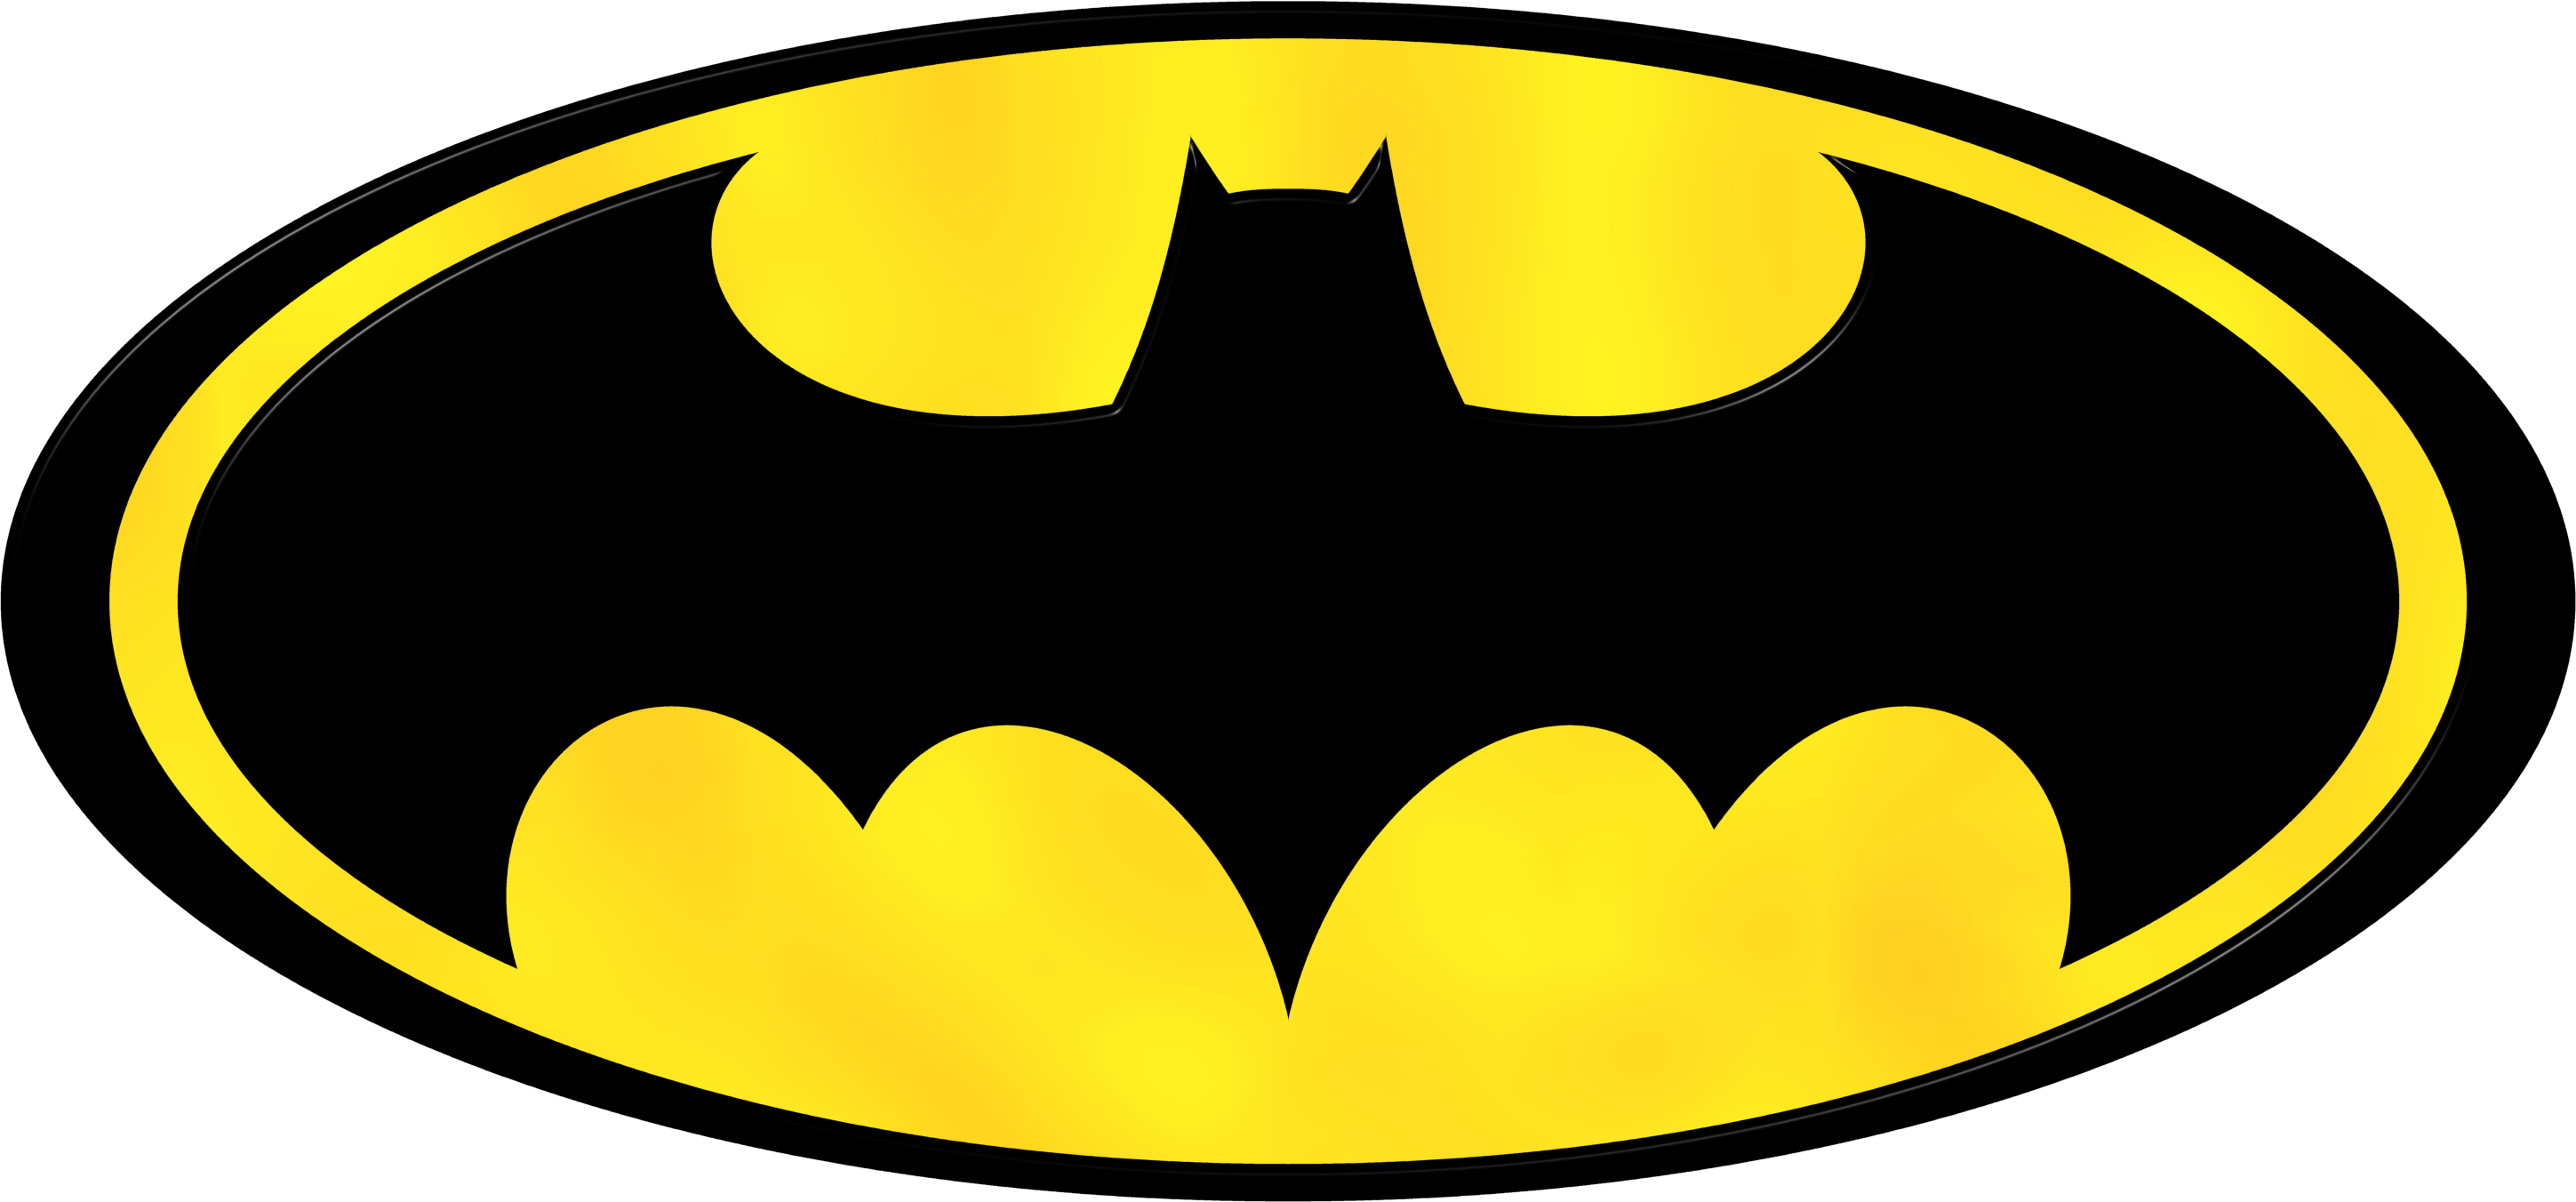 10 Batman Symbol Dark Knight Free Cliparts That You Can Download To